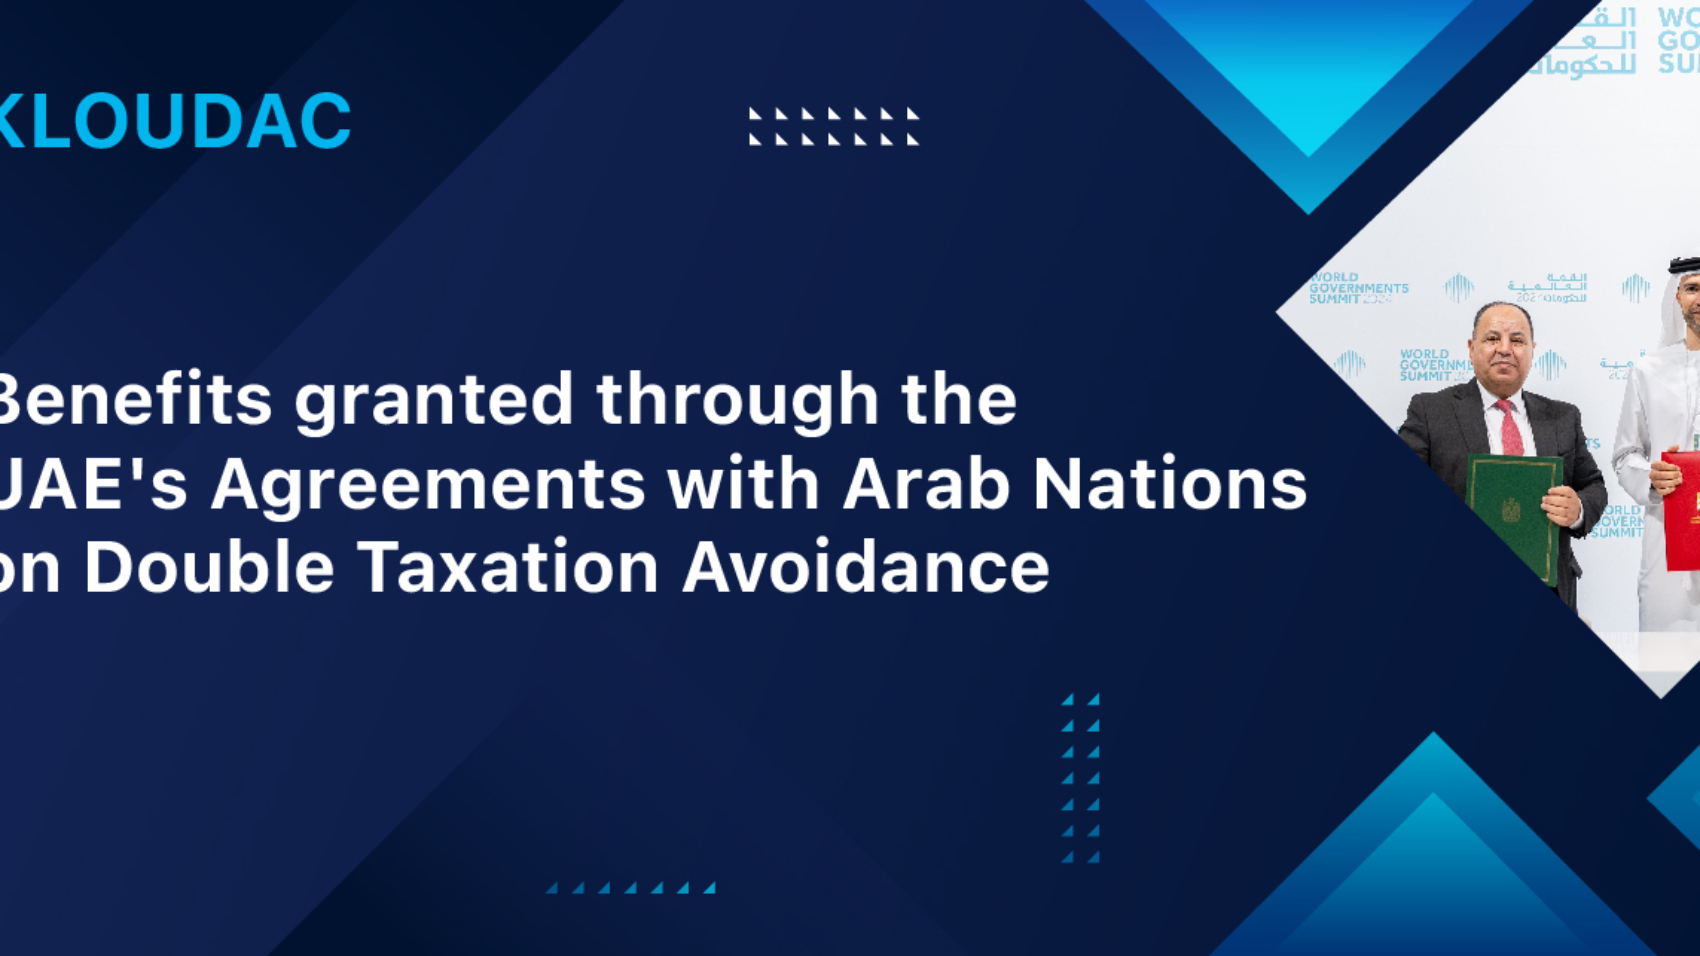 Benefits granted through the UAE's Agreements with Arab Nations on Double Taxation Avoidance